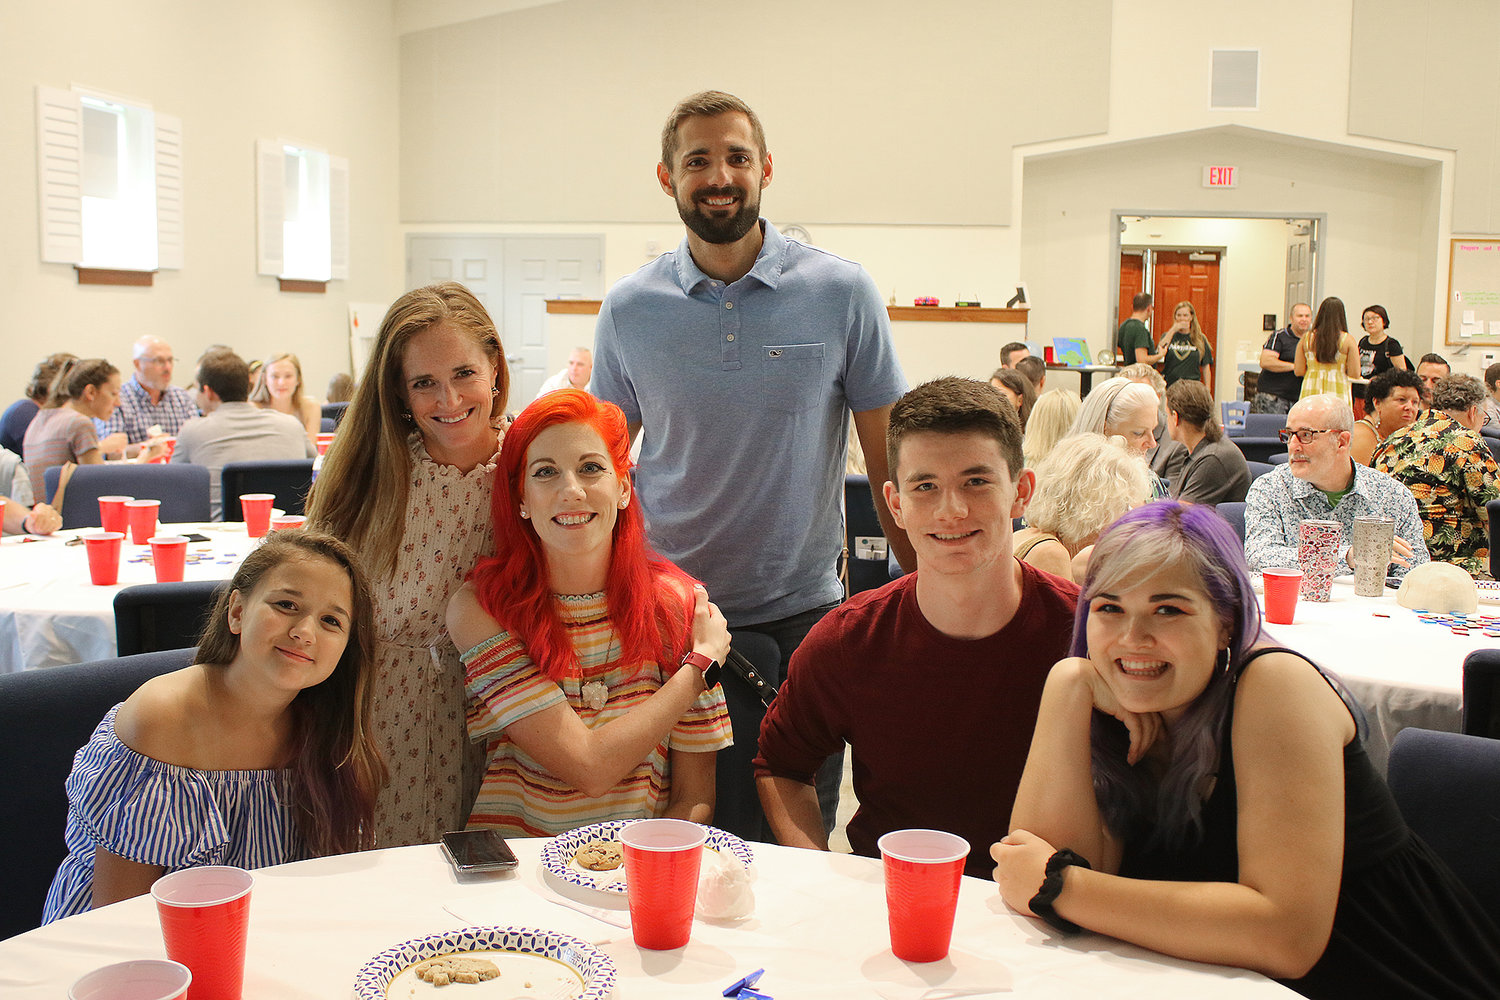 From left, Reagan Bushman, Meg James, Kacey Bushman, Logan James, KJ Bushman and Riley Bushman attended the Night of Celebration Aug. 9 to support The Greatest Exchange.